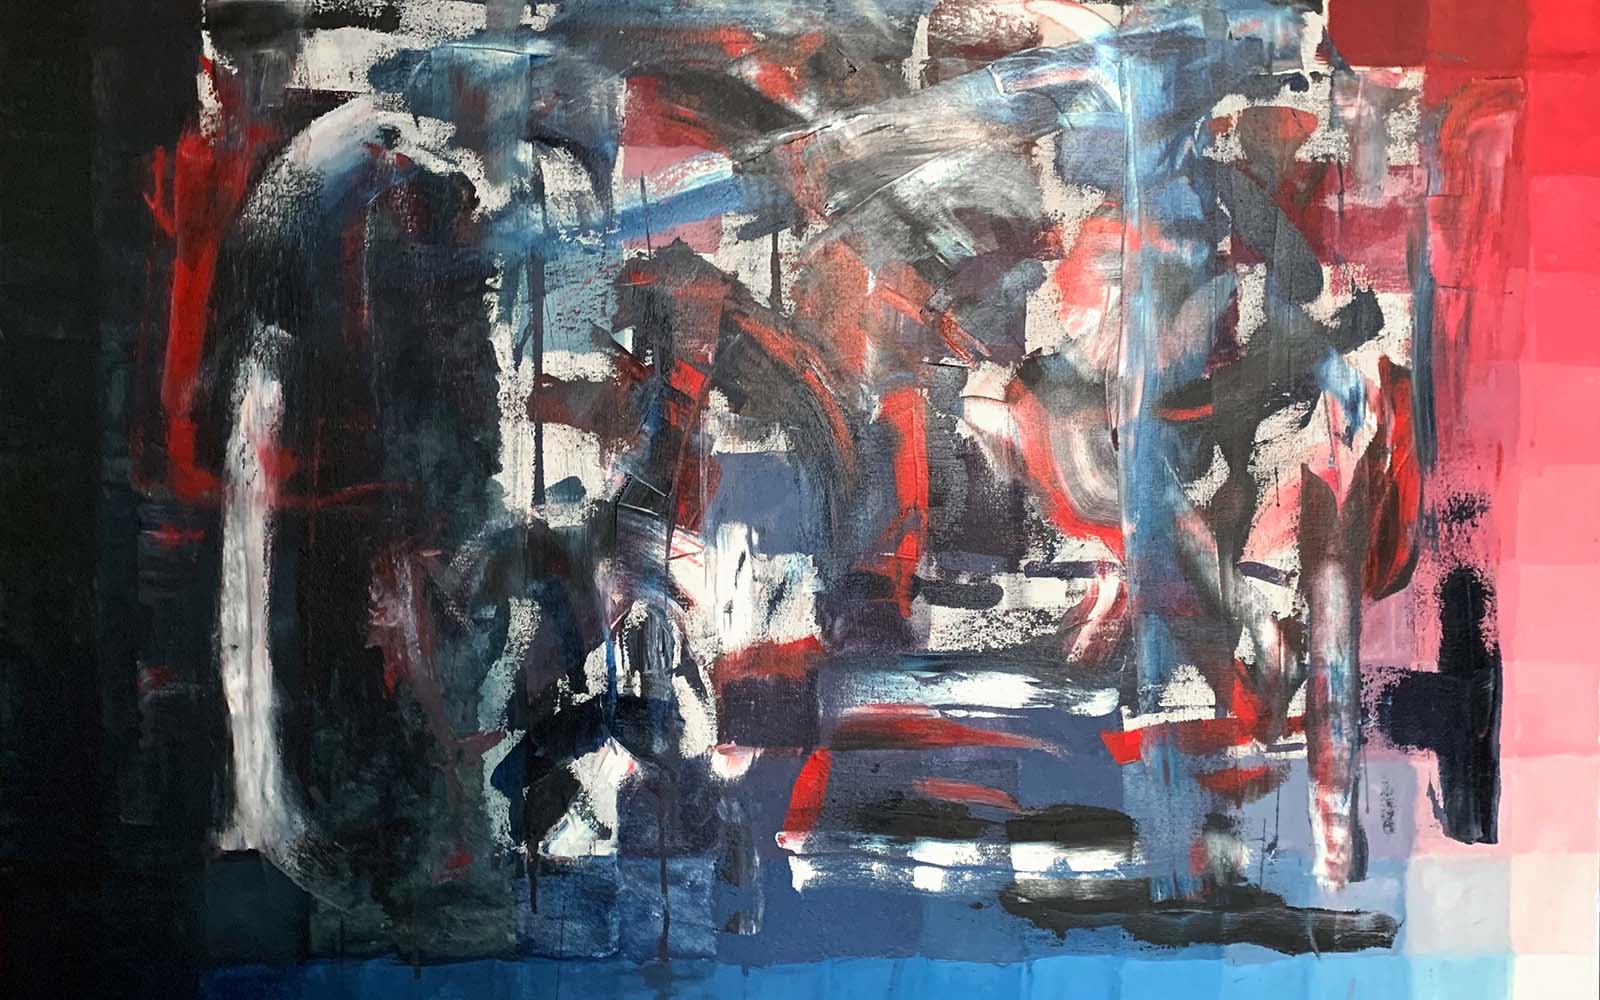 An abstract painting of red, white, blue and black.